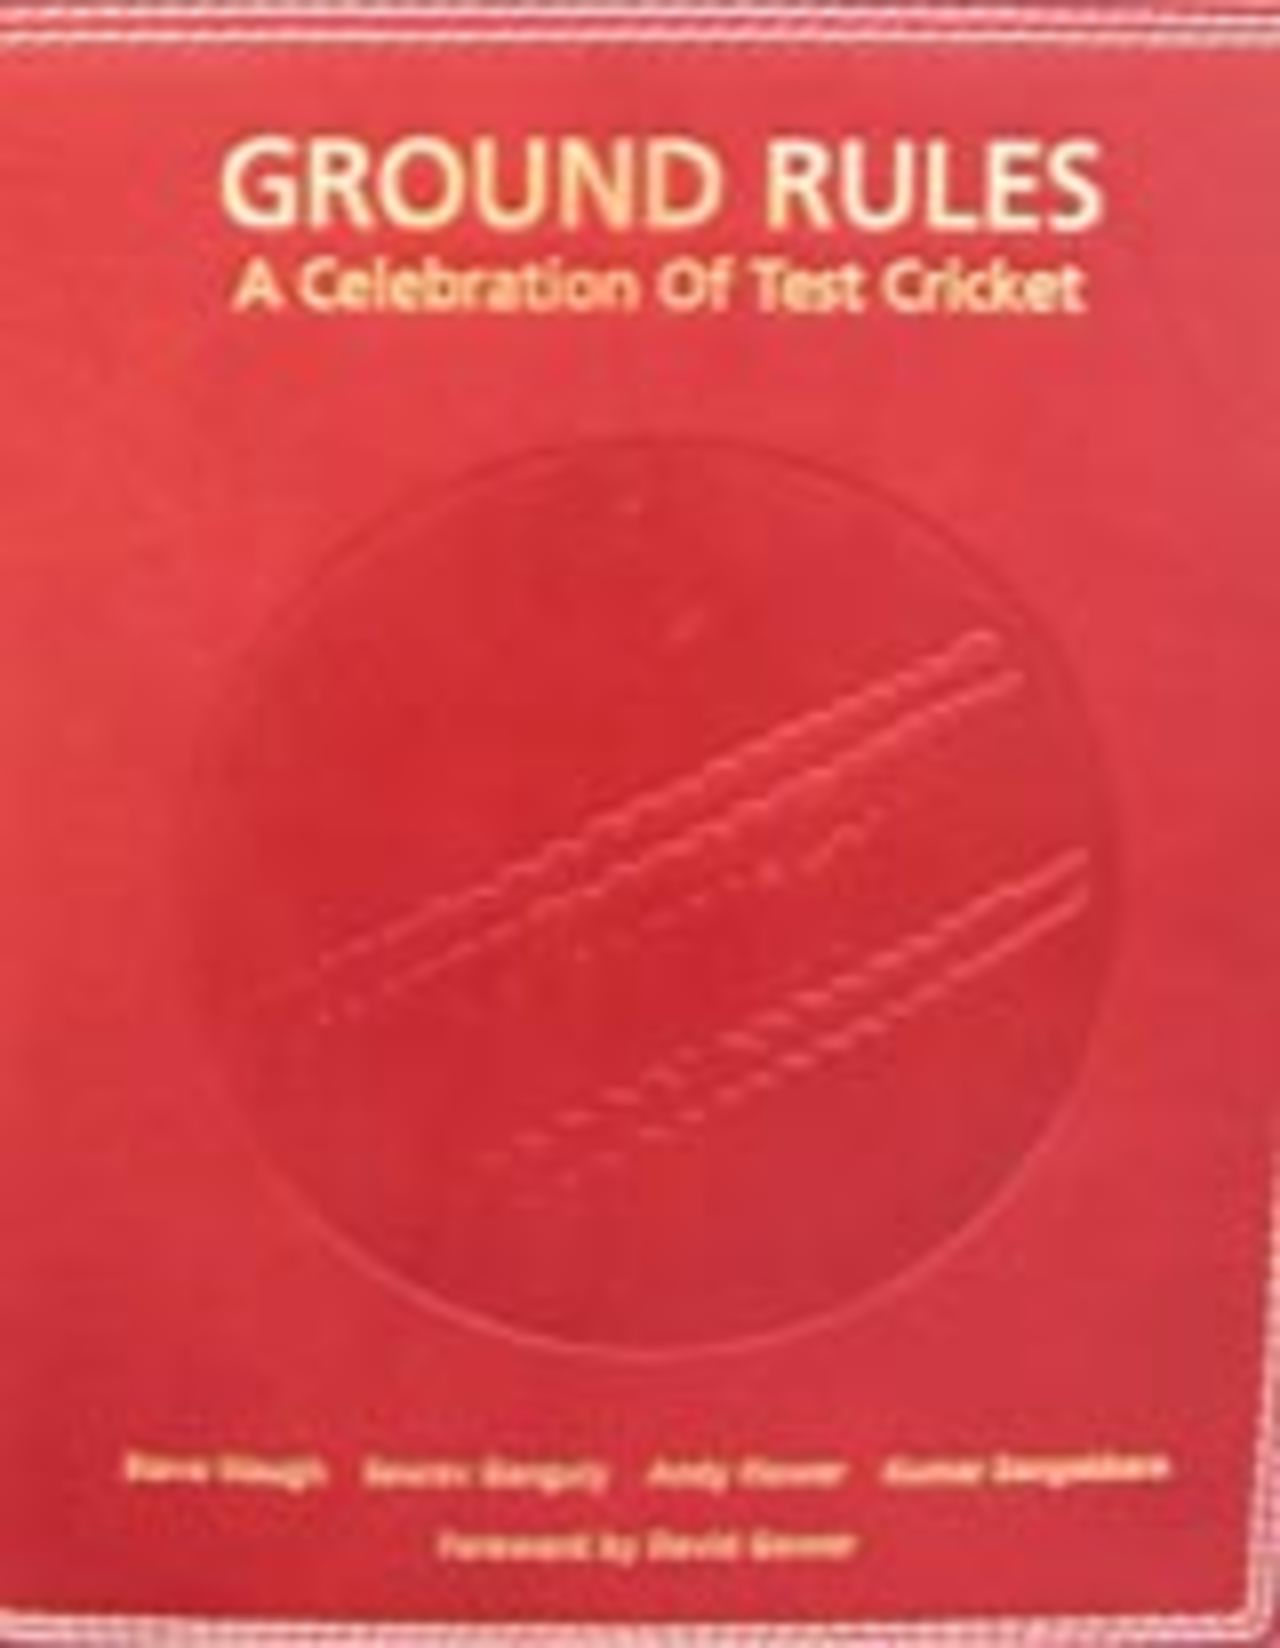 The leather-bound edition of Ground Rules